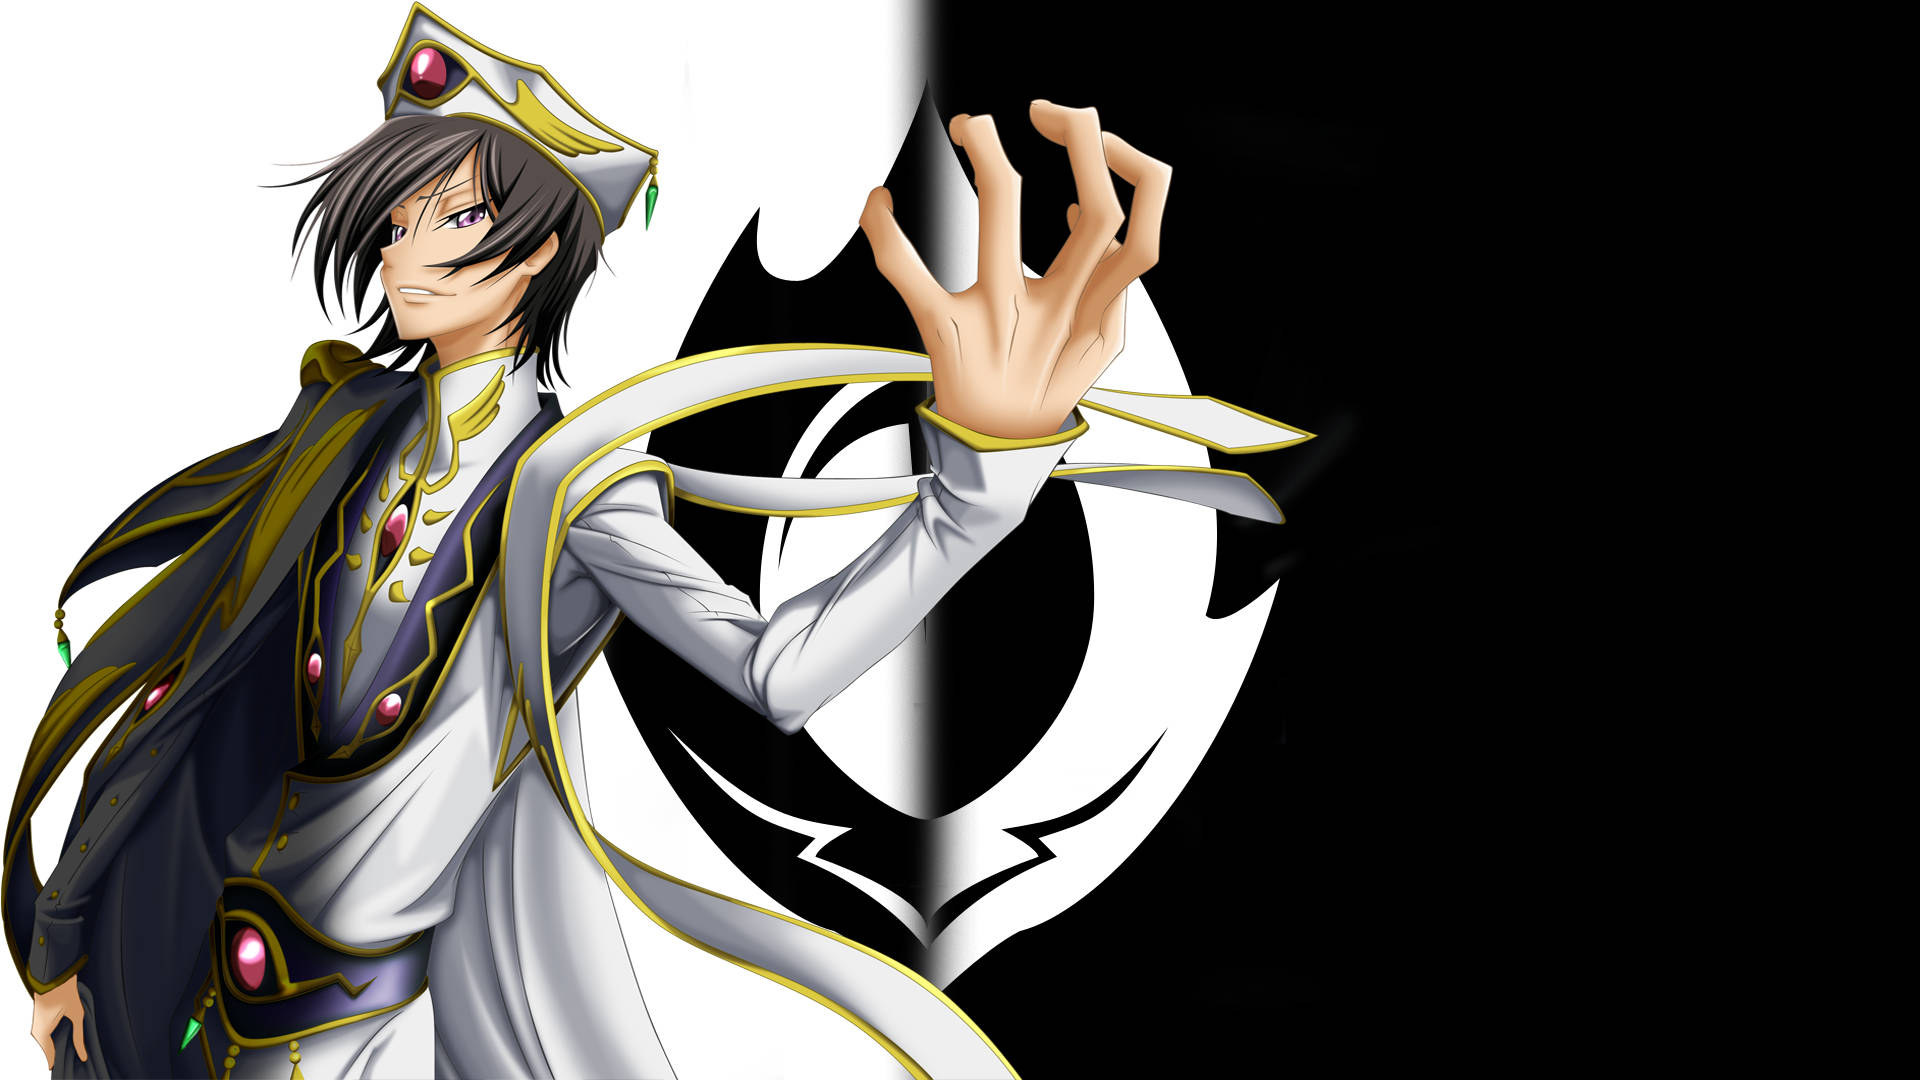 100+] Lelouch Backgrounds